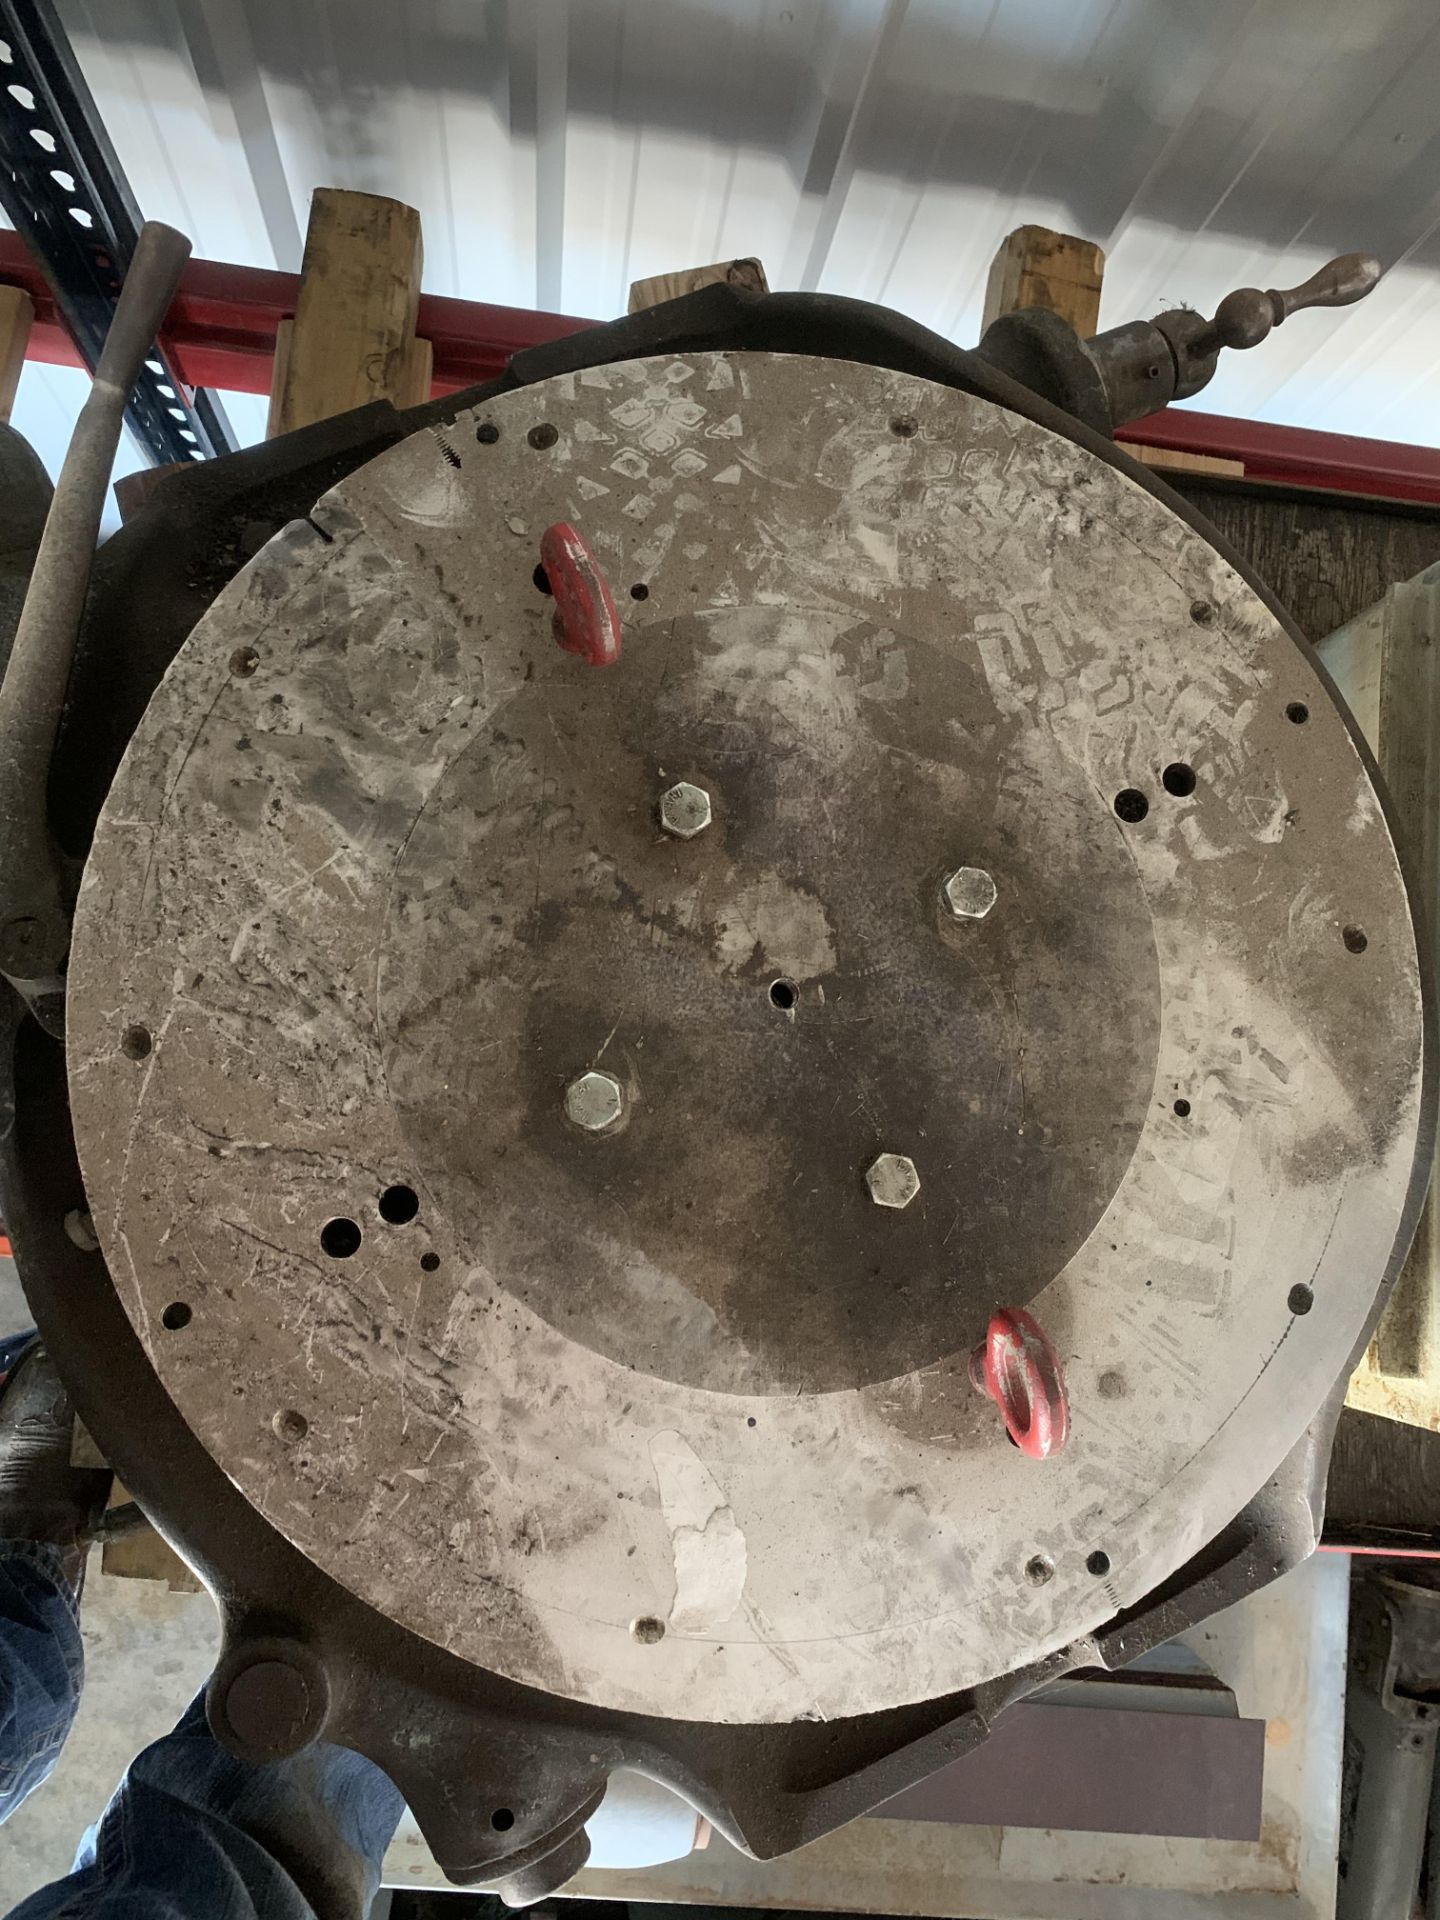 24" diameter rotary table and 20" diameter rotary table - Image 7 of 9